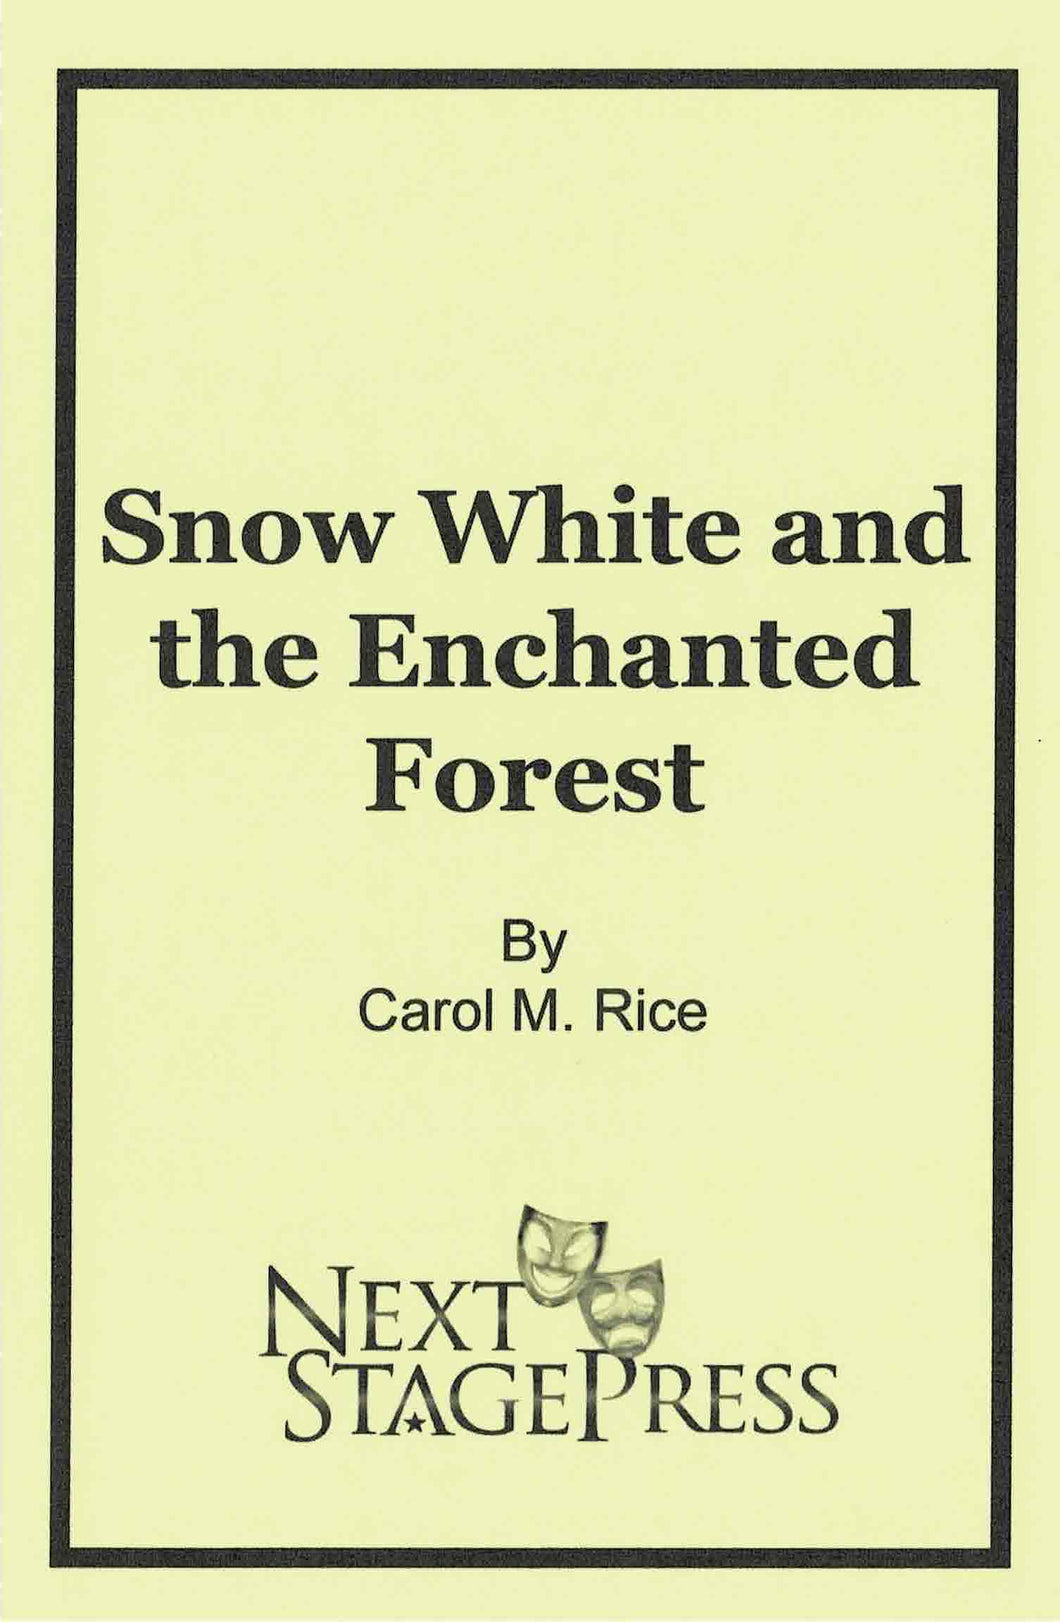 Snow White and the Enchanted Forest